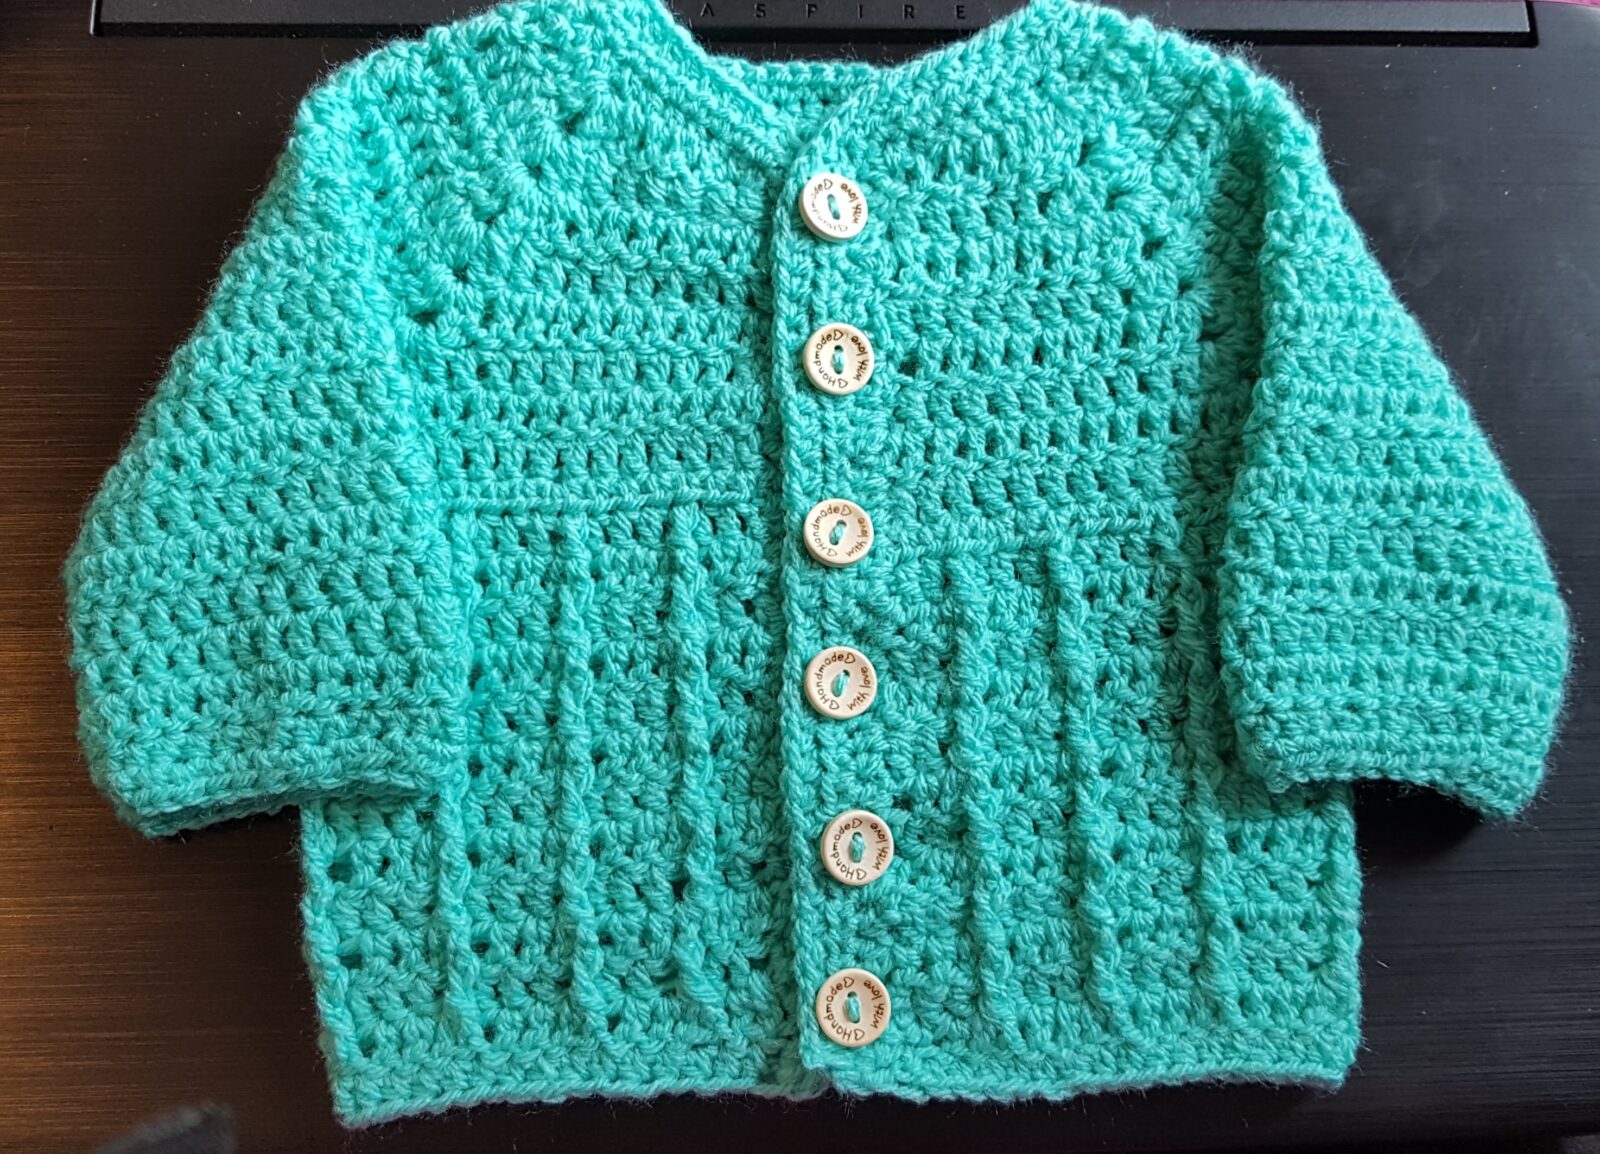 New Baby Crochet Cardigan and Blanket - At Home A Lot